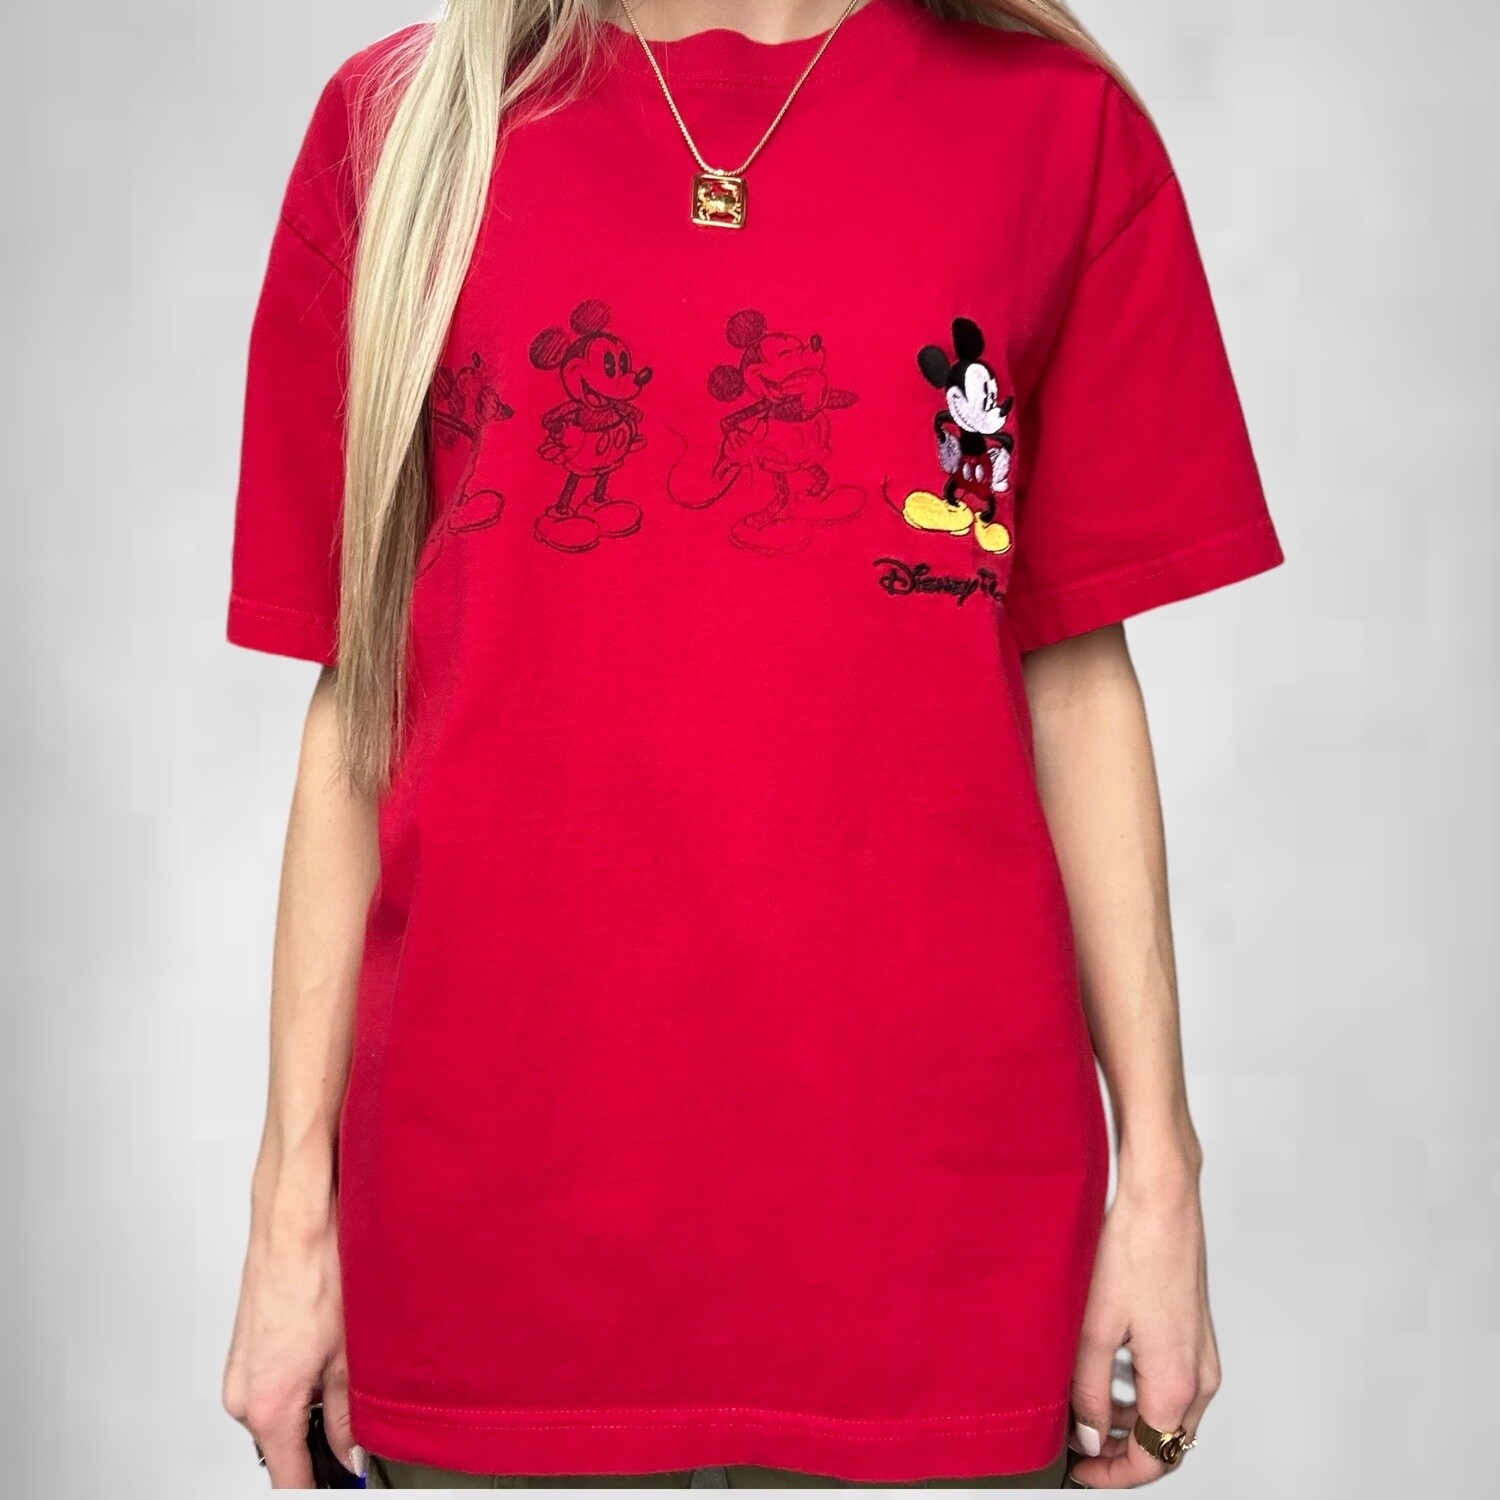 Disney’s Mickey Mouse Sketch Tee, Size: Large, Color: Red, Style: Disney